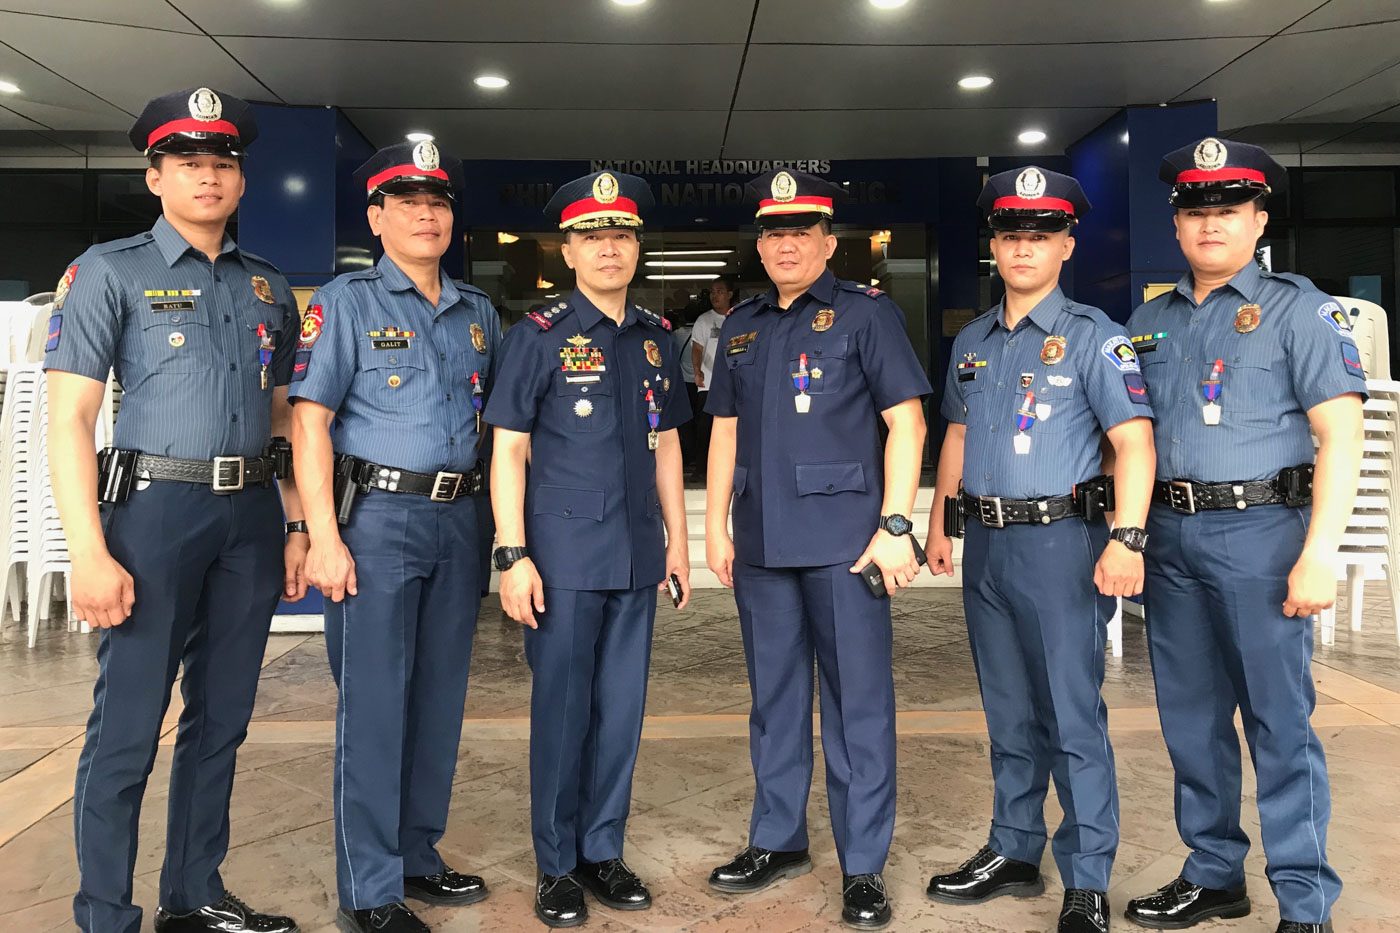 PNP awards medals to Makati police for Time in Manila bar raids